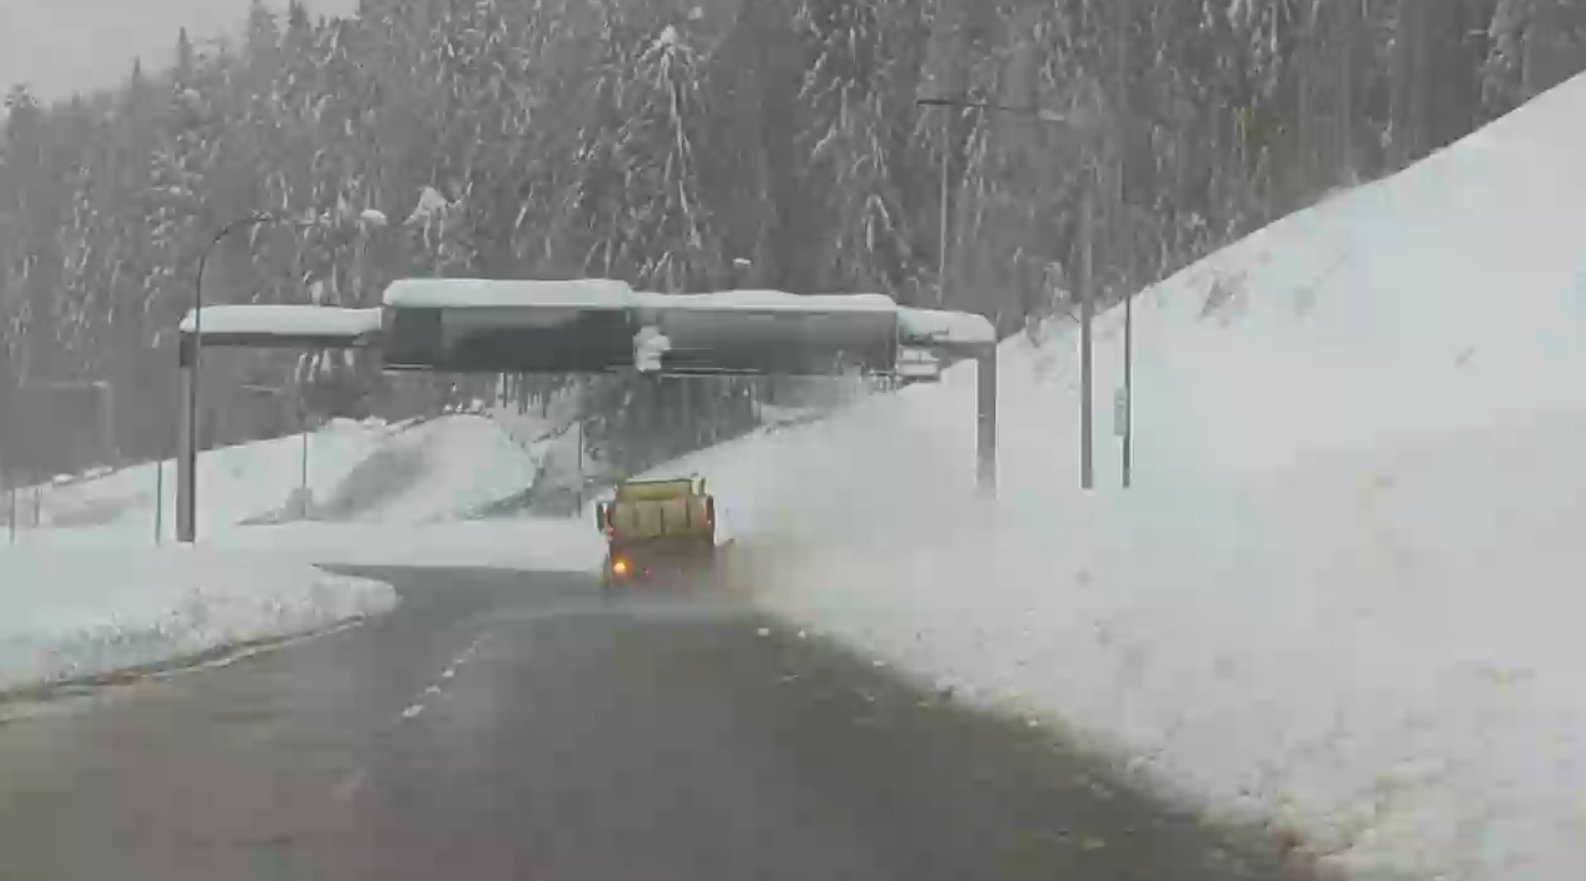 A mountain pass road with two lanes has a large snow plow truck working underneath a large overhead sign that is covered in snow. On each side of the road are huge amounts of snow and there are tons of snow-covered tall trees in the distance.